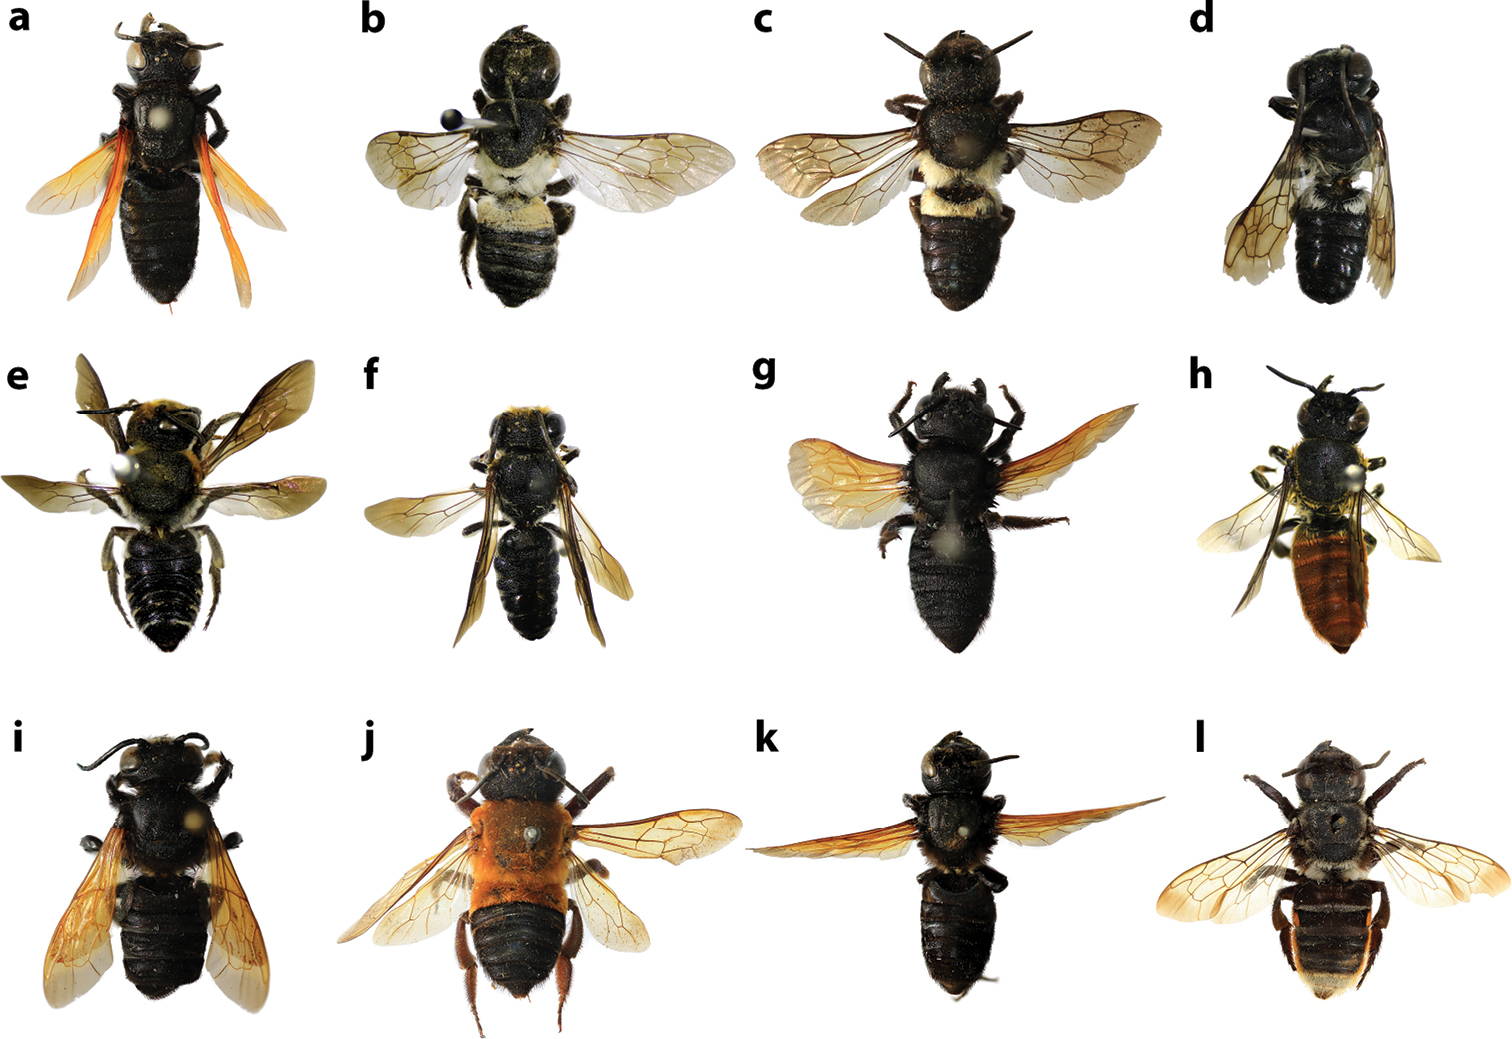 Resin Bees Of Genus Megachile Subgenera Callomegachile And Carinula Hymenoptera Megachilidae From Thailand With Description Of A New Species